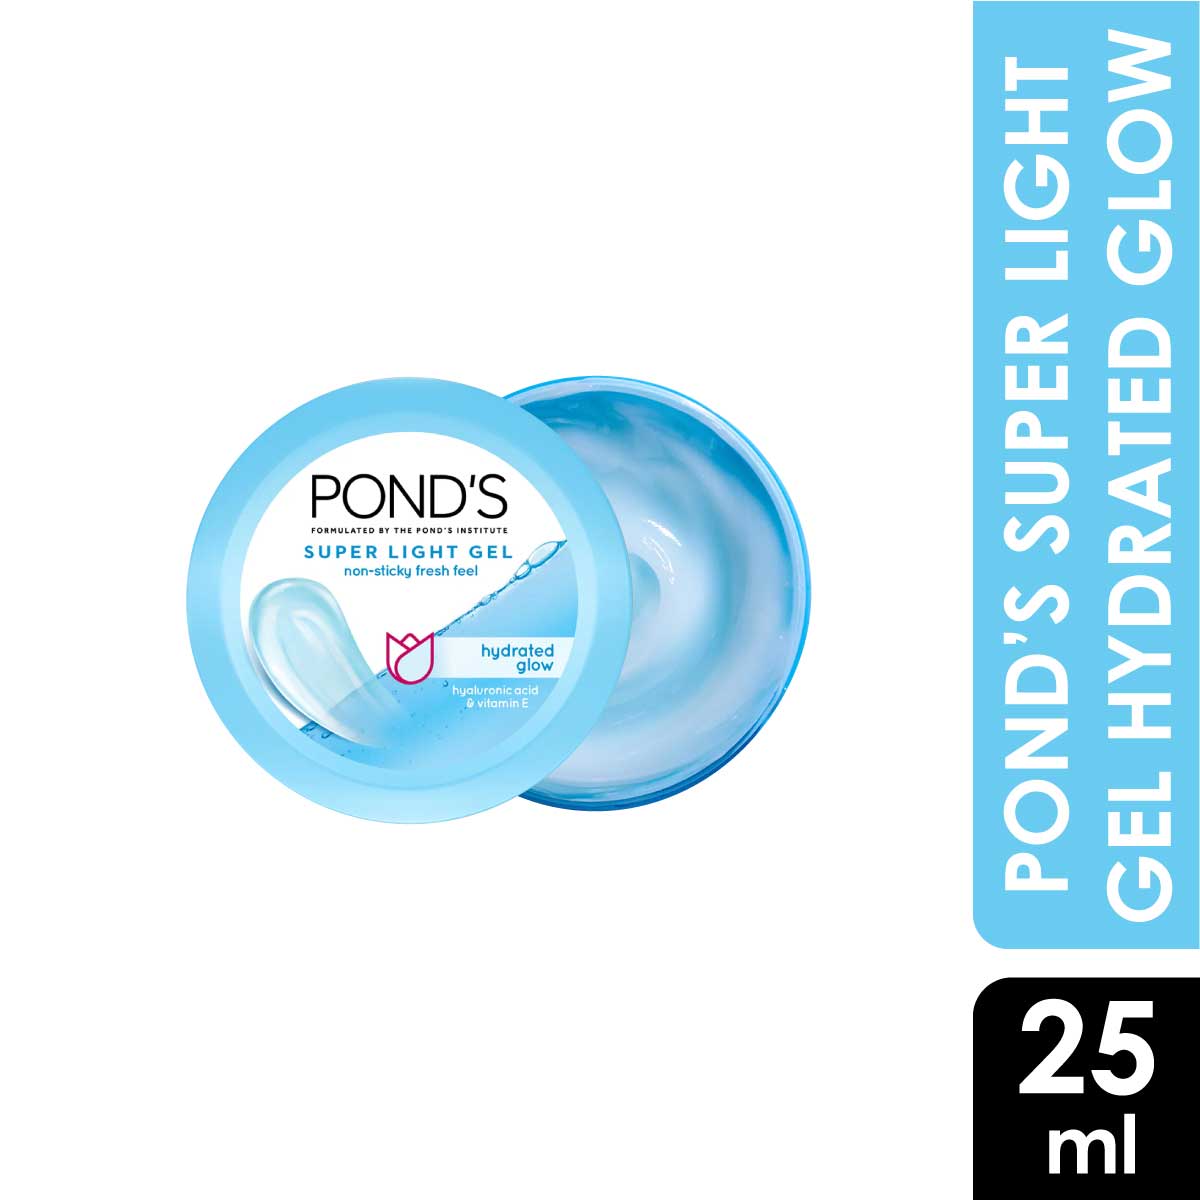 POND’S Super Light Gel 25ml Hydrated Glow With Hyaluronic Acid & Vitamin E